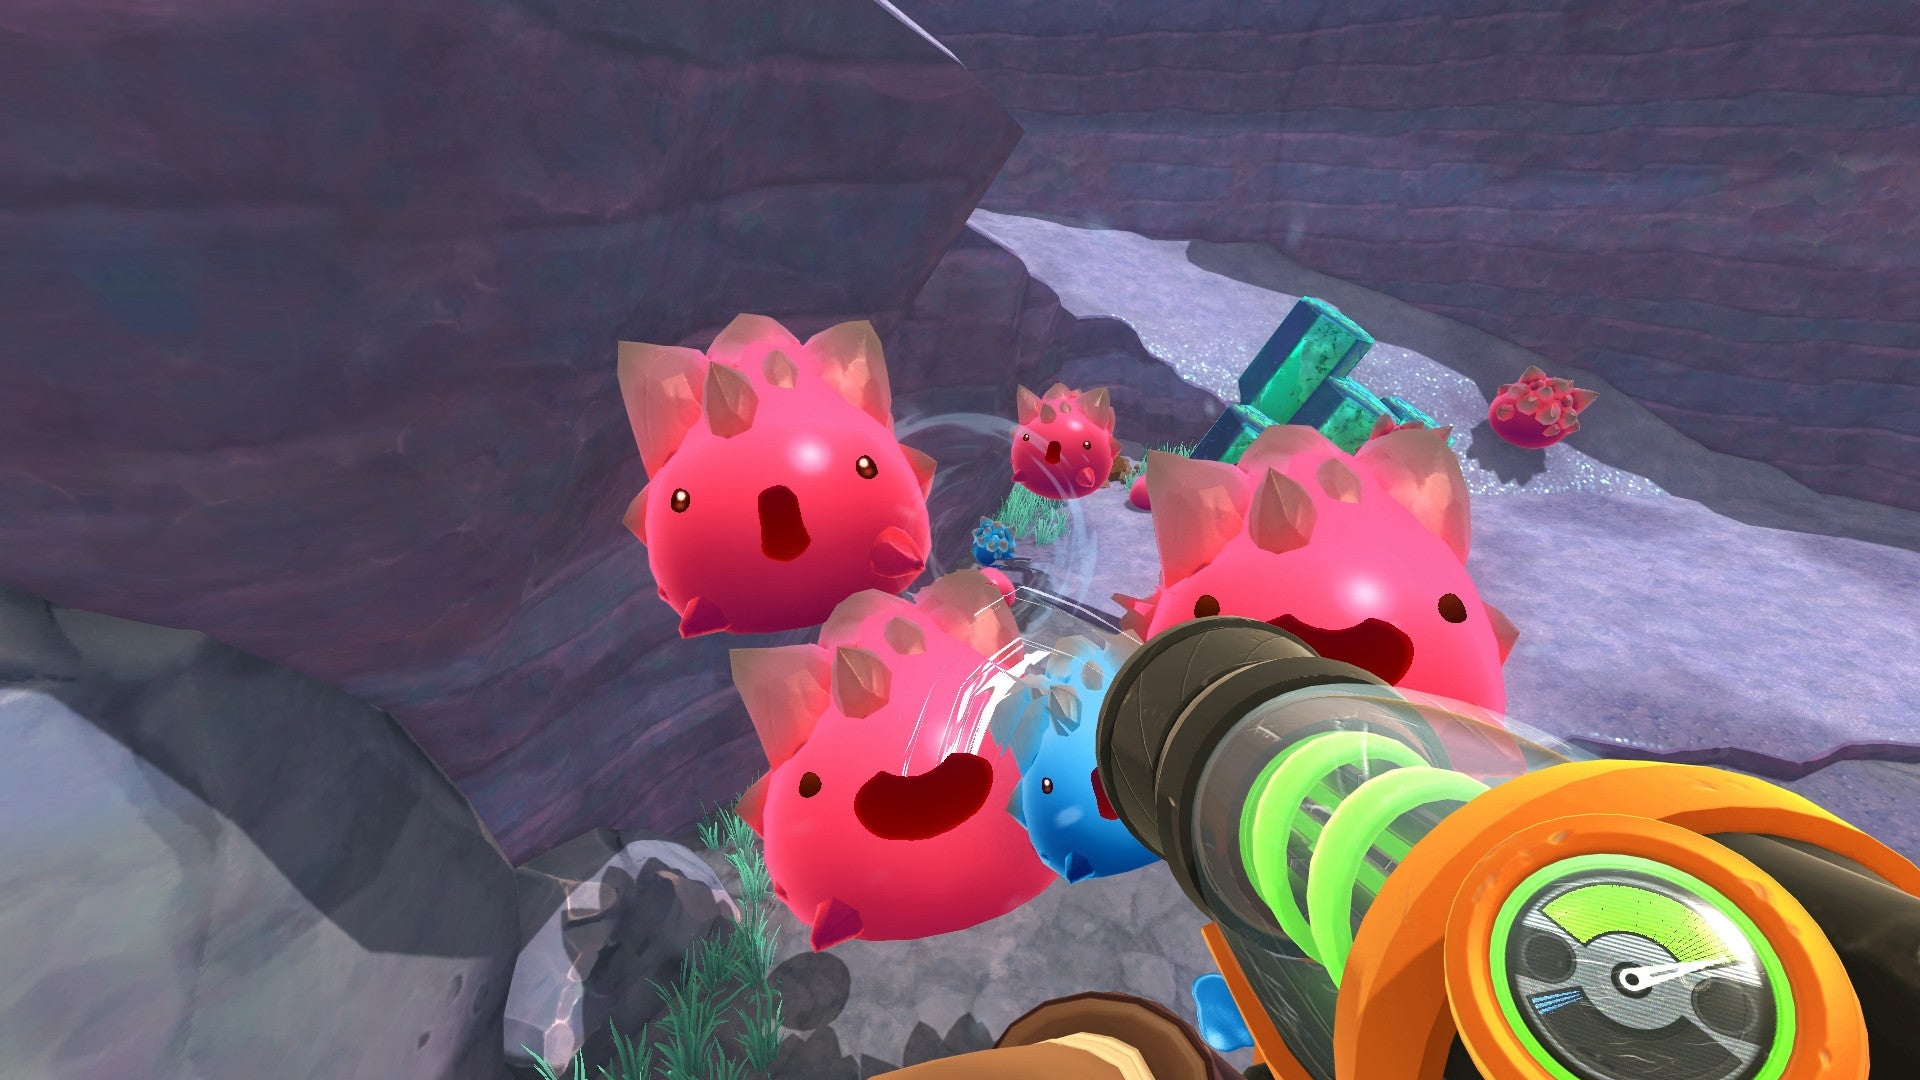 Image for Slime Rancher is the next free game on Epic Games Store